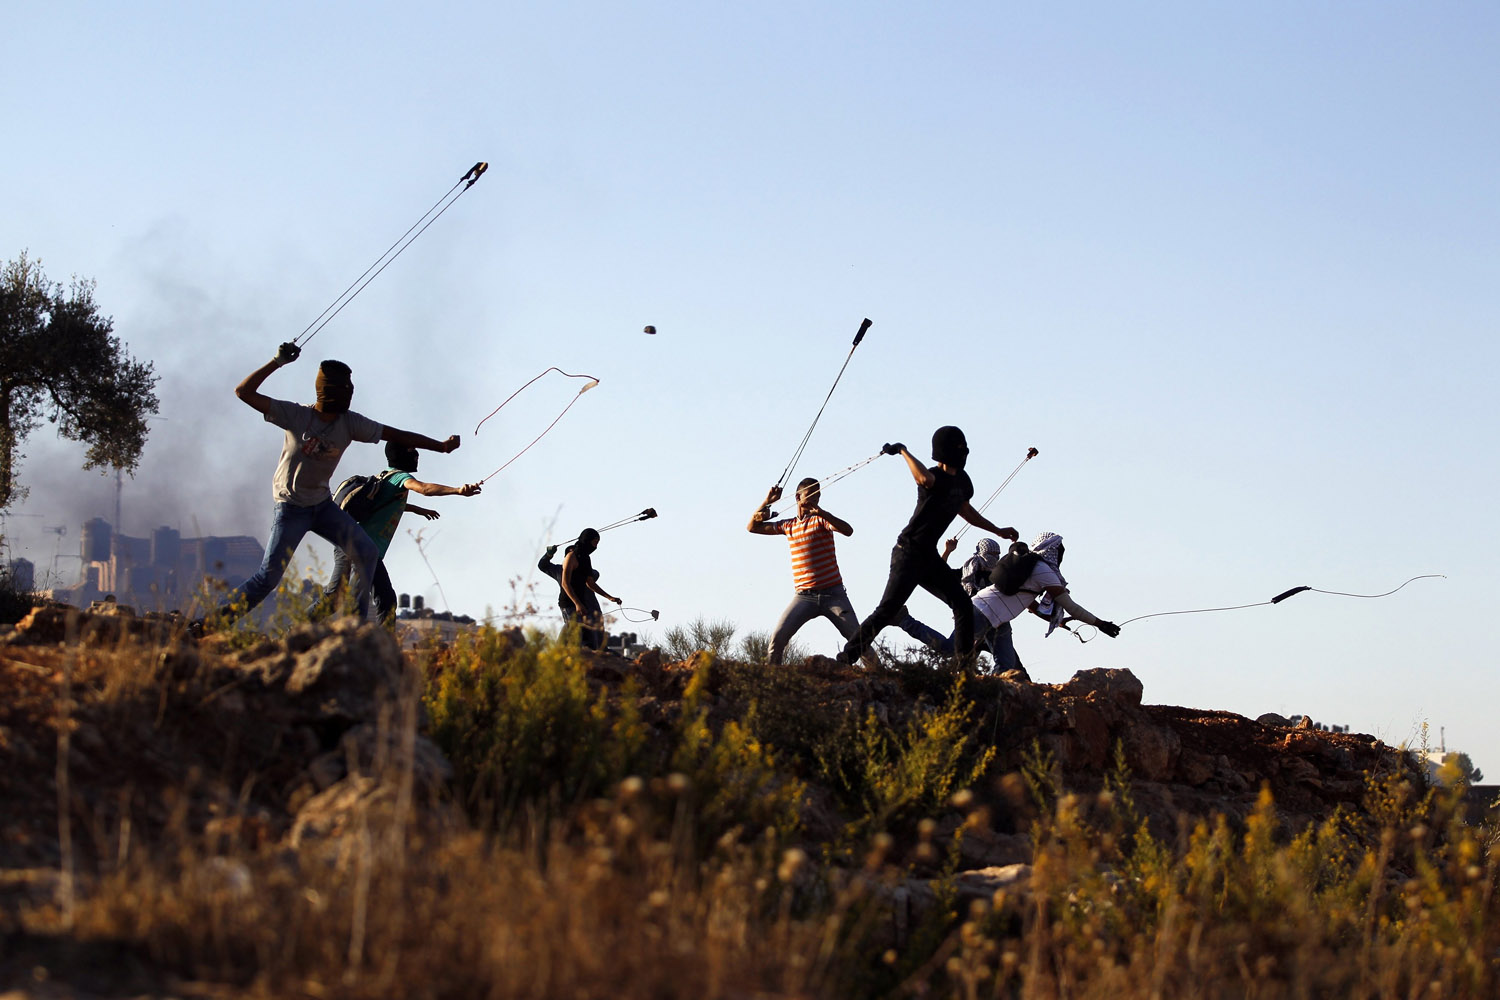 Palestinian protesters hurl rocks at Israeli soldiers during clashes in Betunia, near the West Bank city of Ramallah